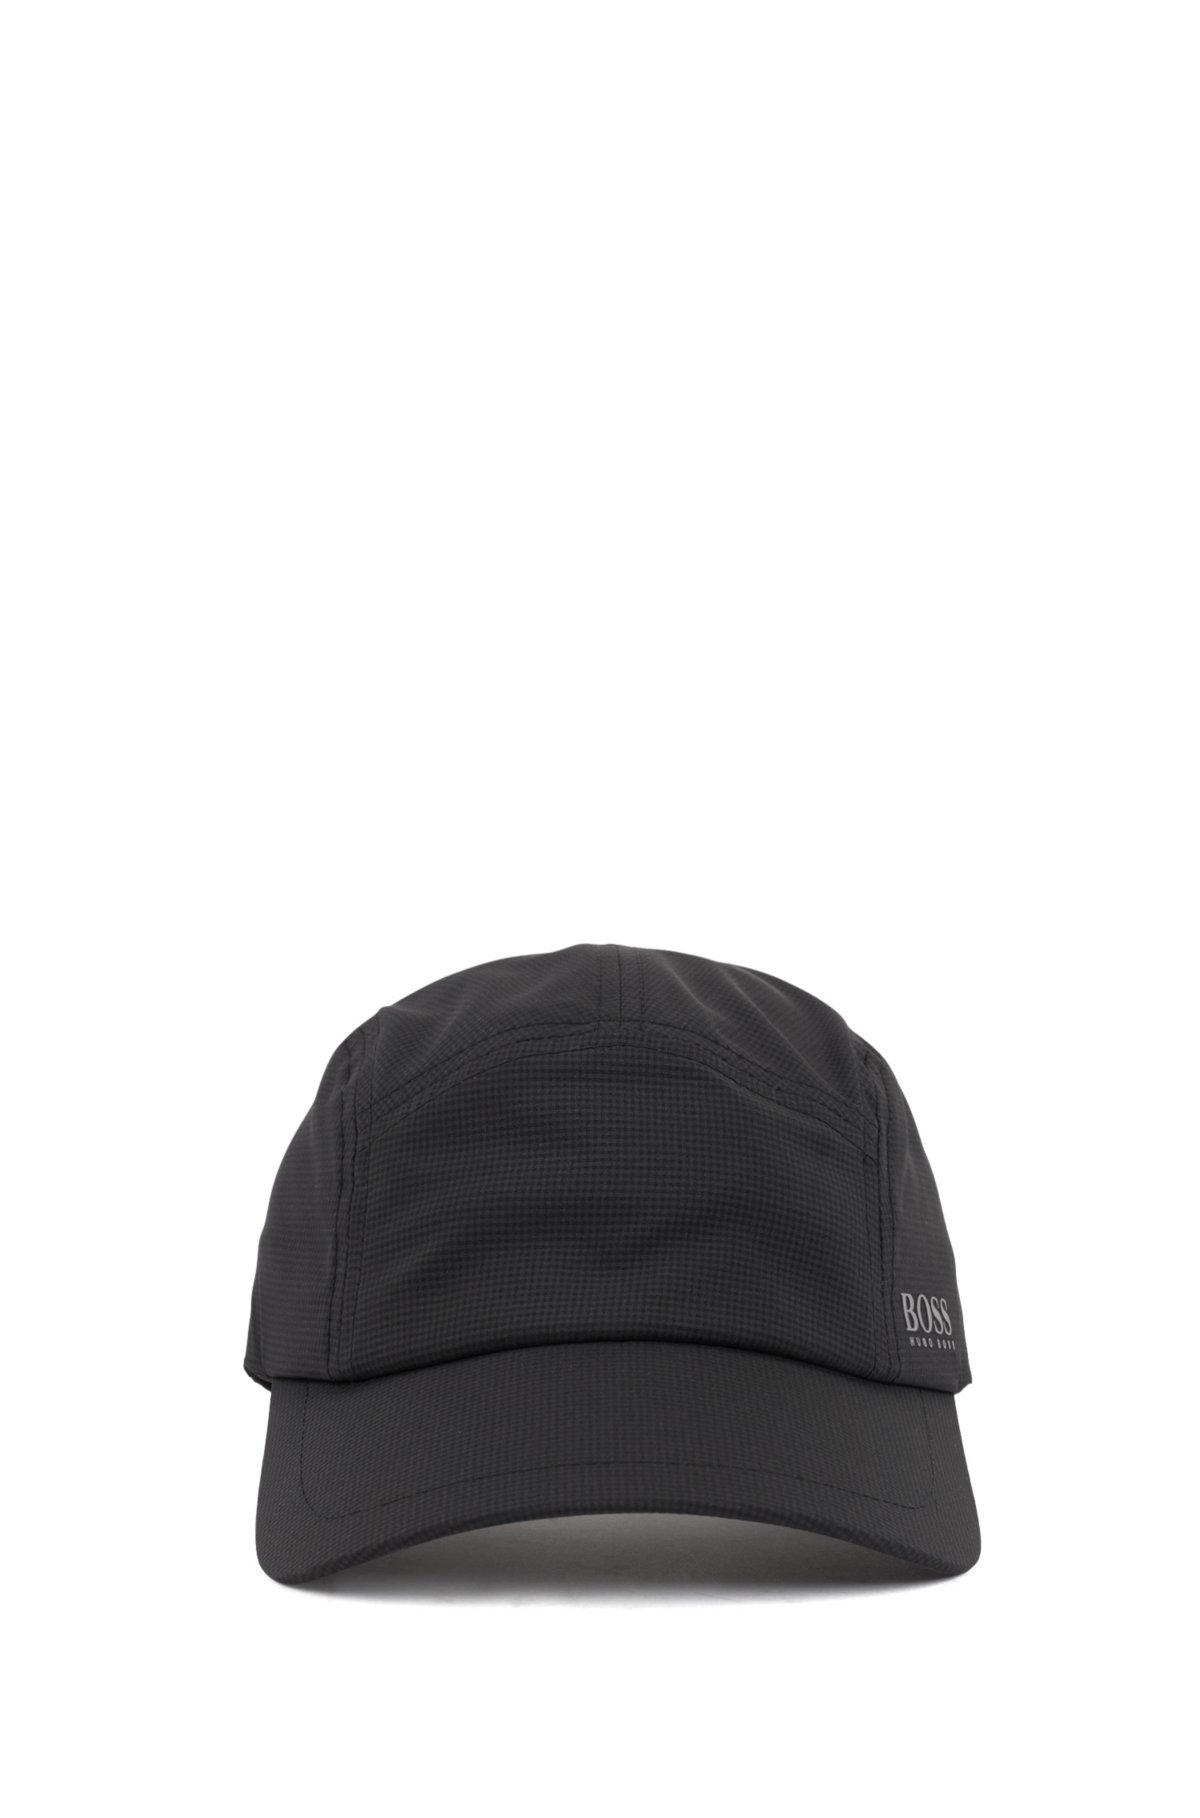 BOSS - Breathable cap in stretch fabric with micro pattern